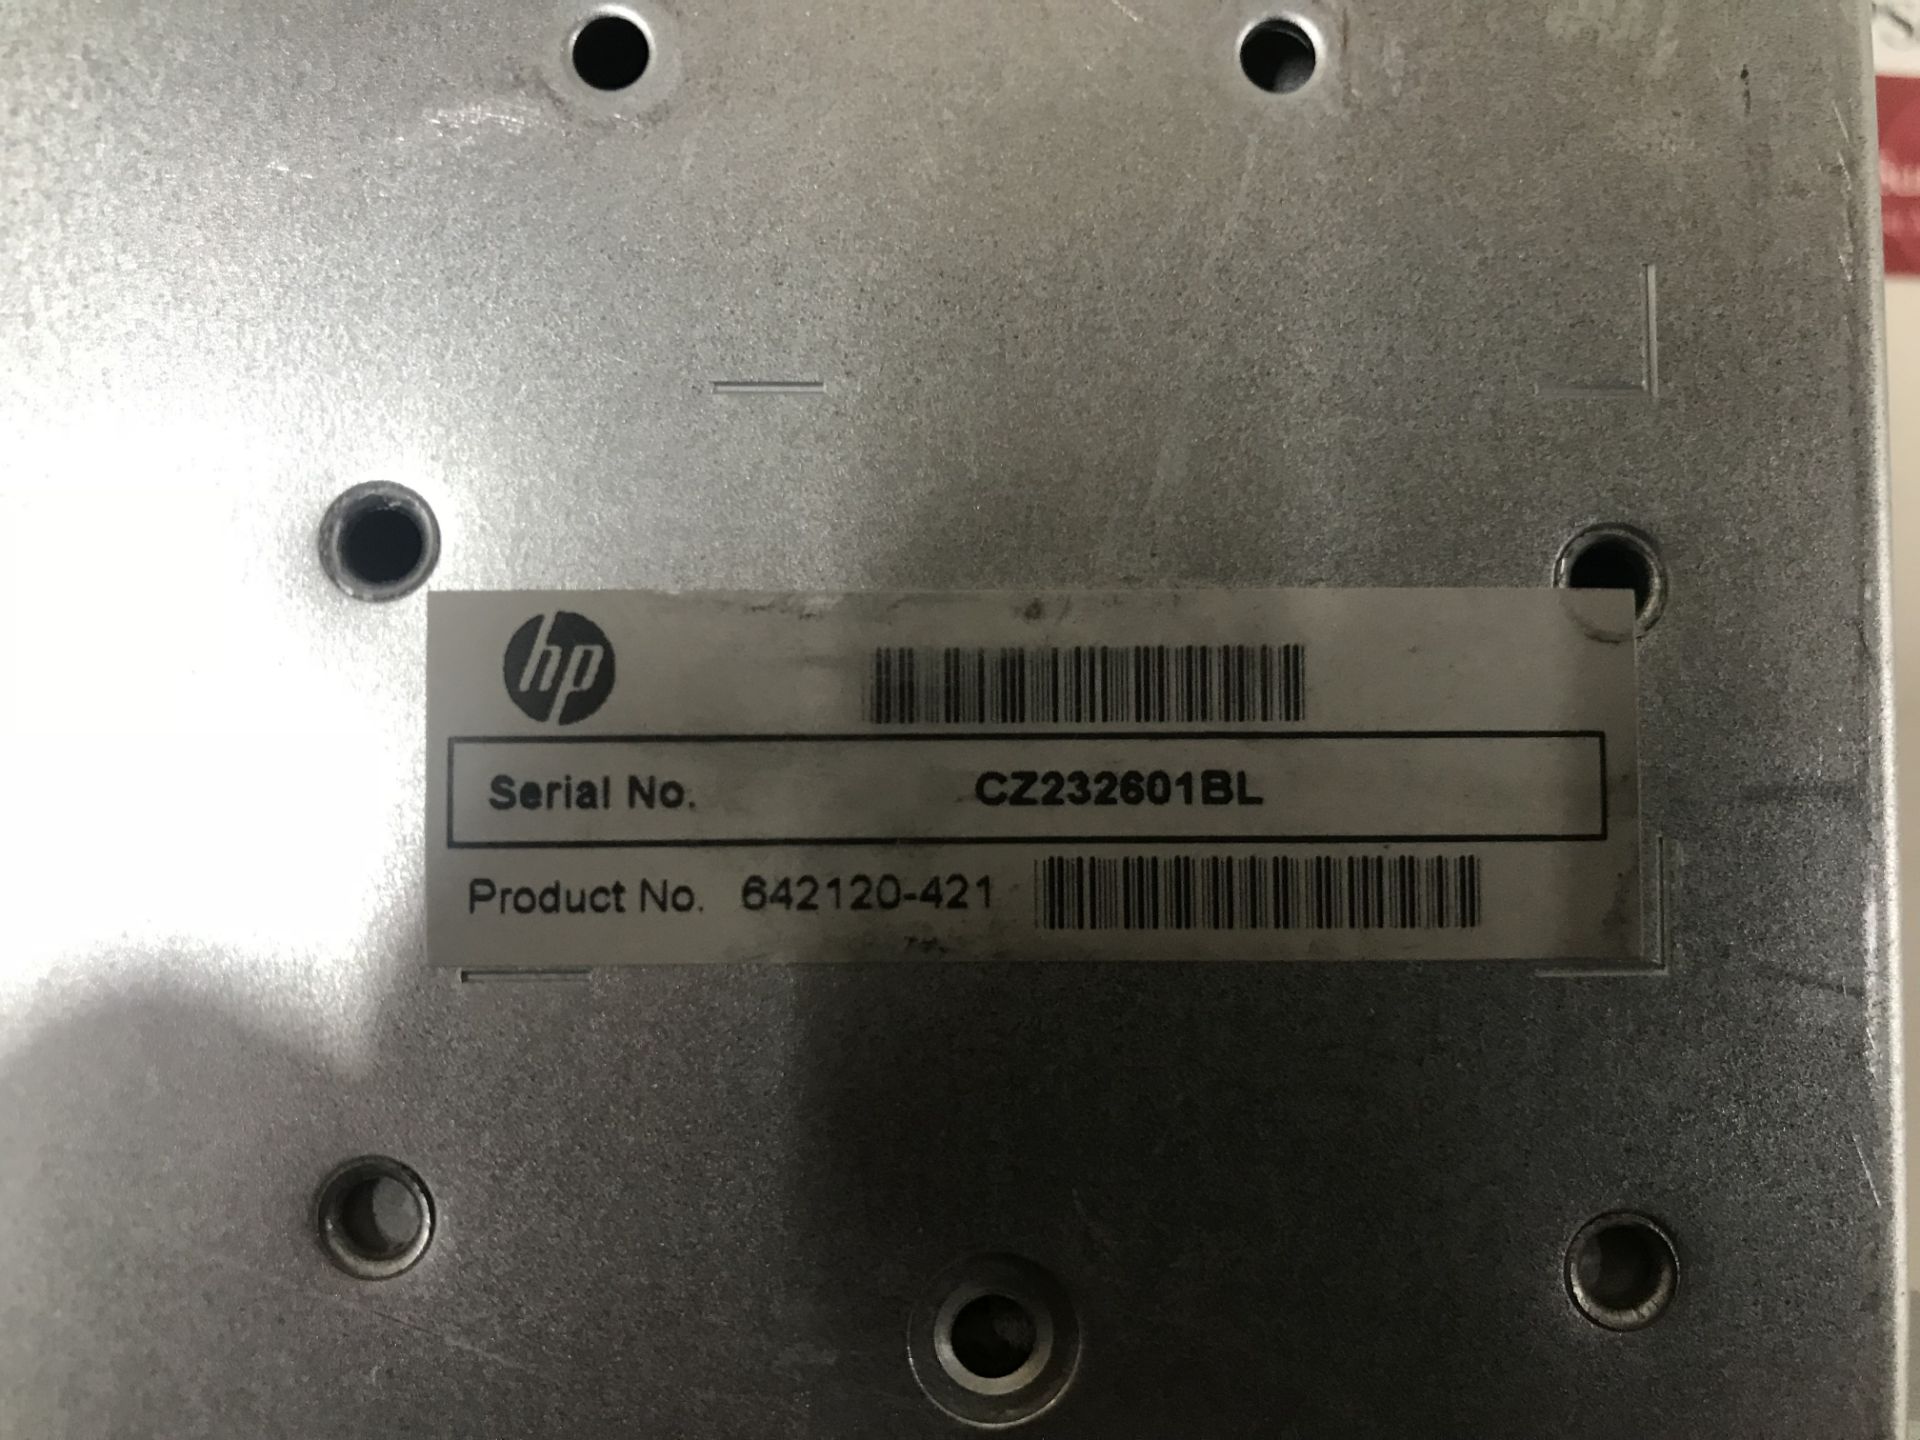 HP Proliant Server Unit with 6 x 450GB HDD - Image 8 of 8